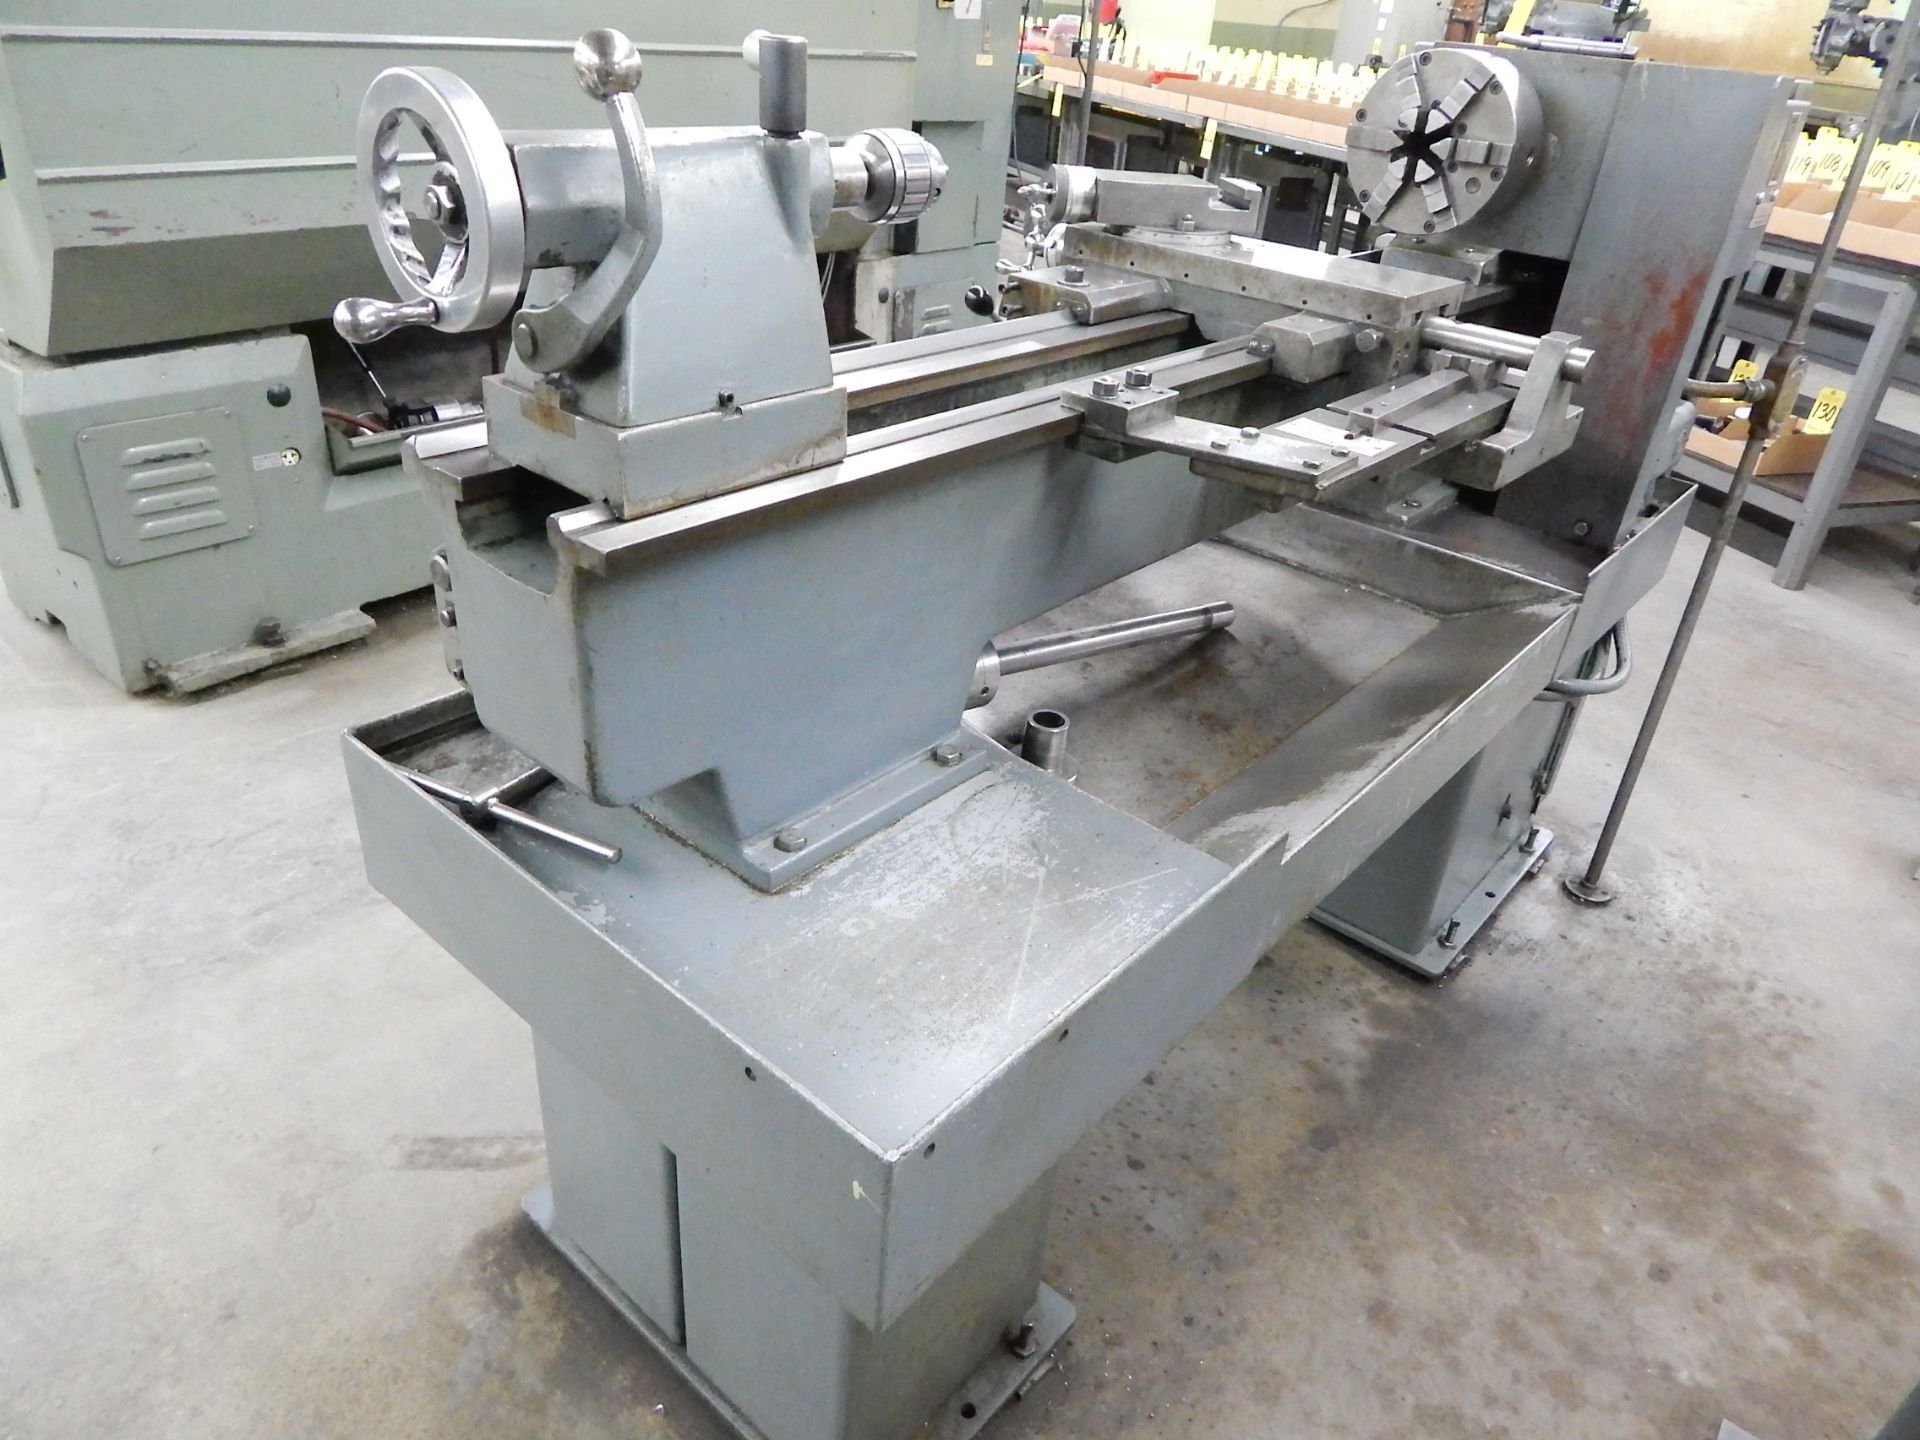 Standard Modern Model 1340 tool Room Lathe, SN 8812, 13" x 40", Taper Attachment, 8" 6-Jaw Chuck - Image 11 of 14